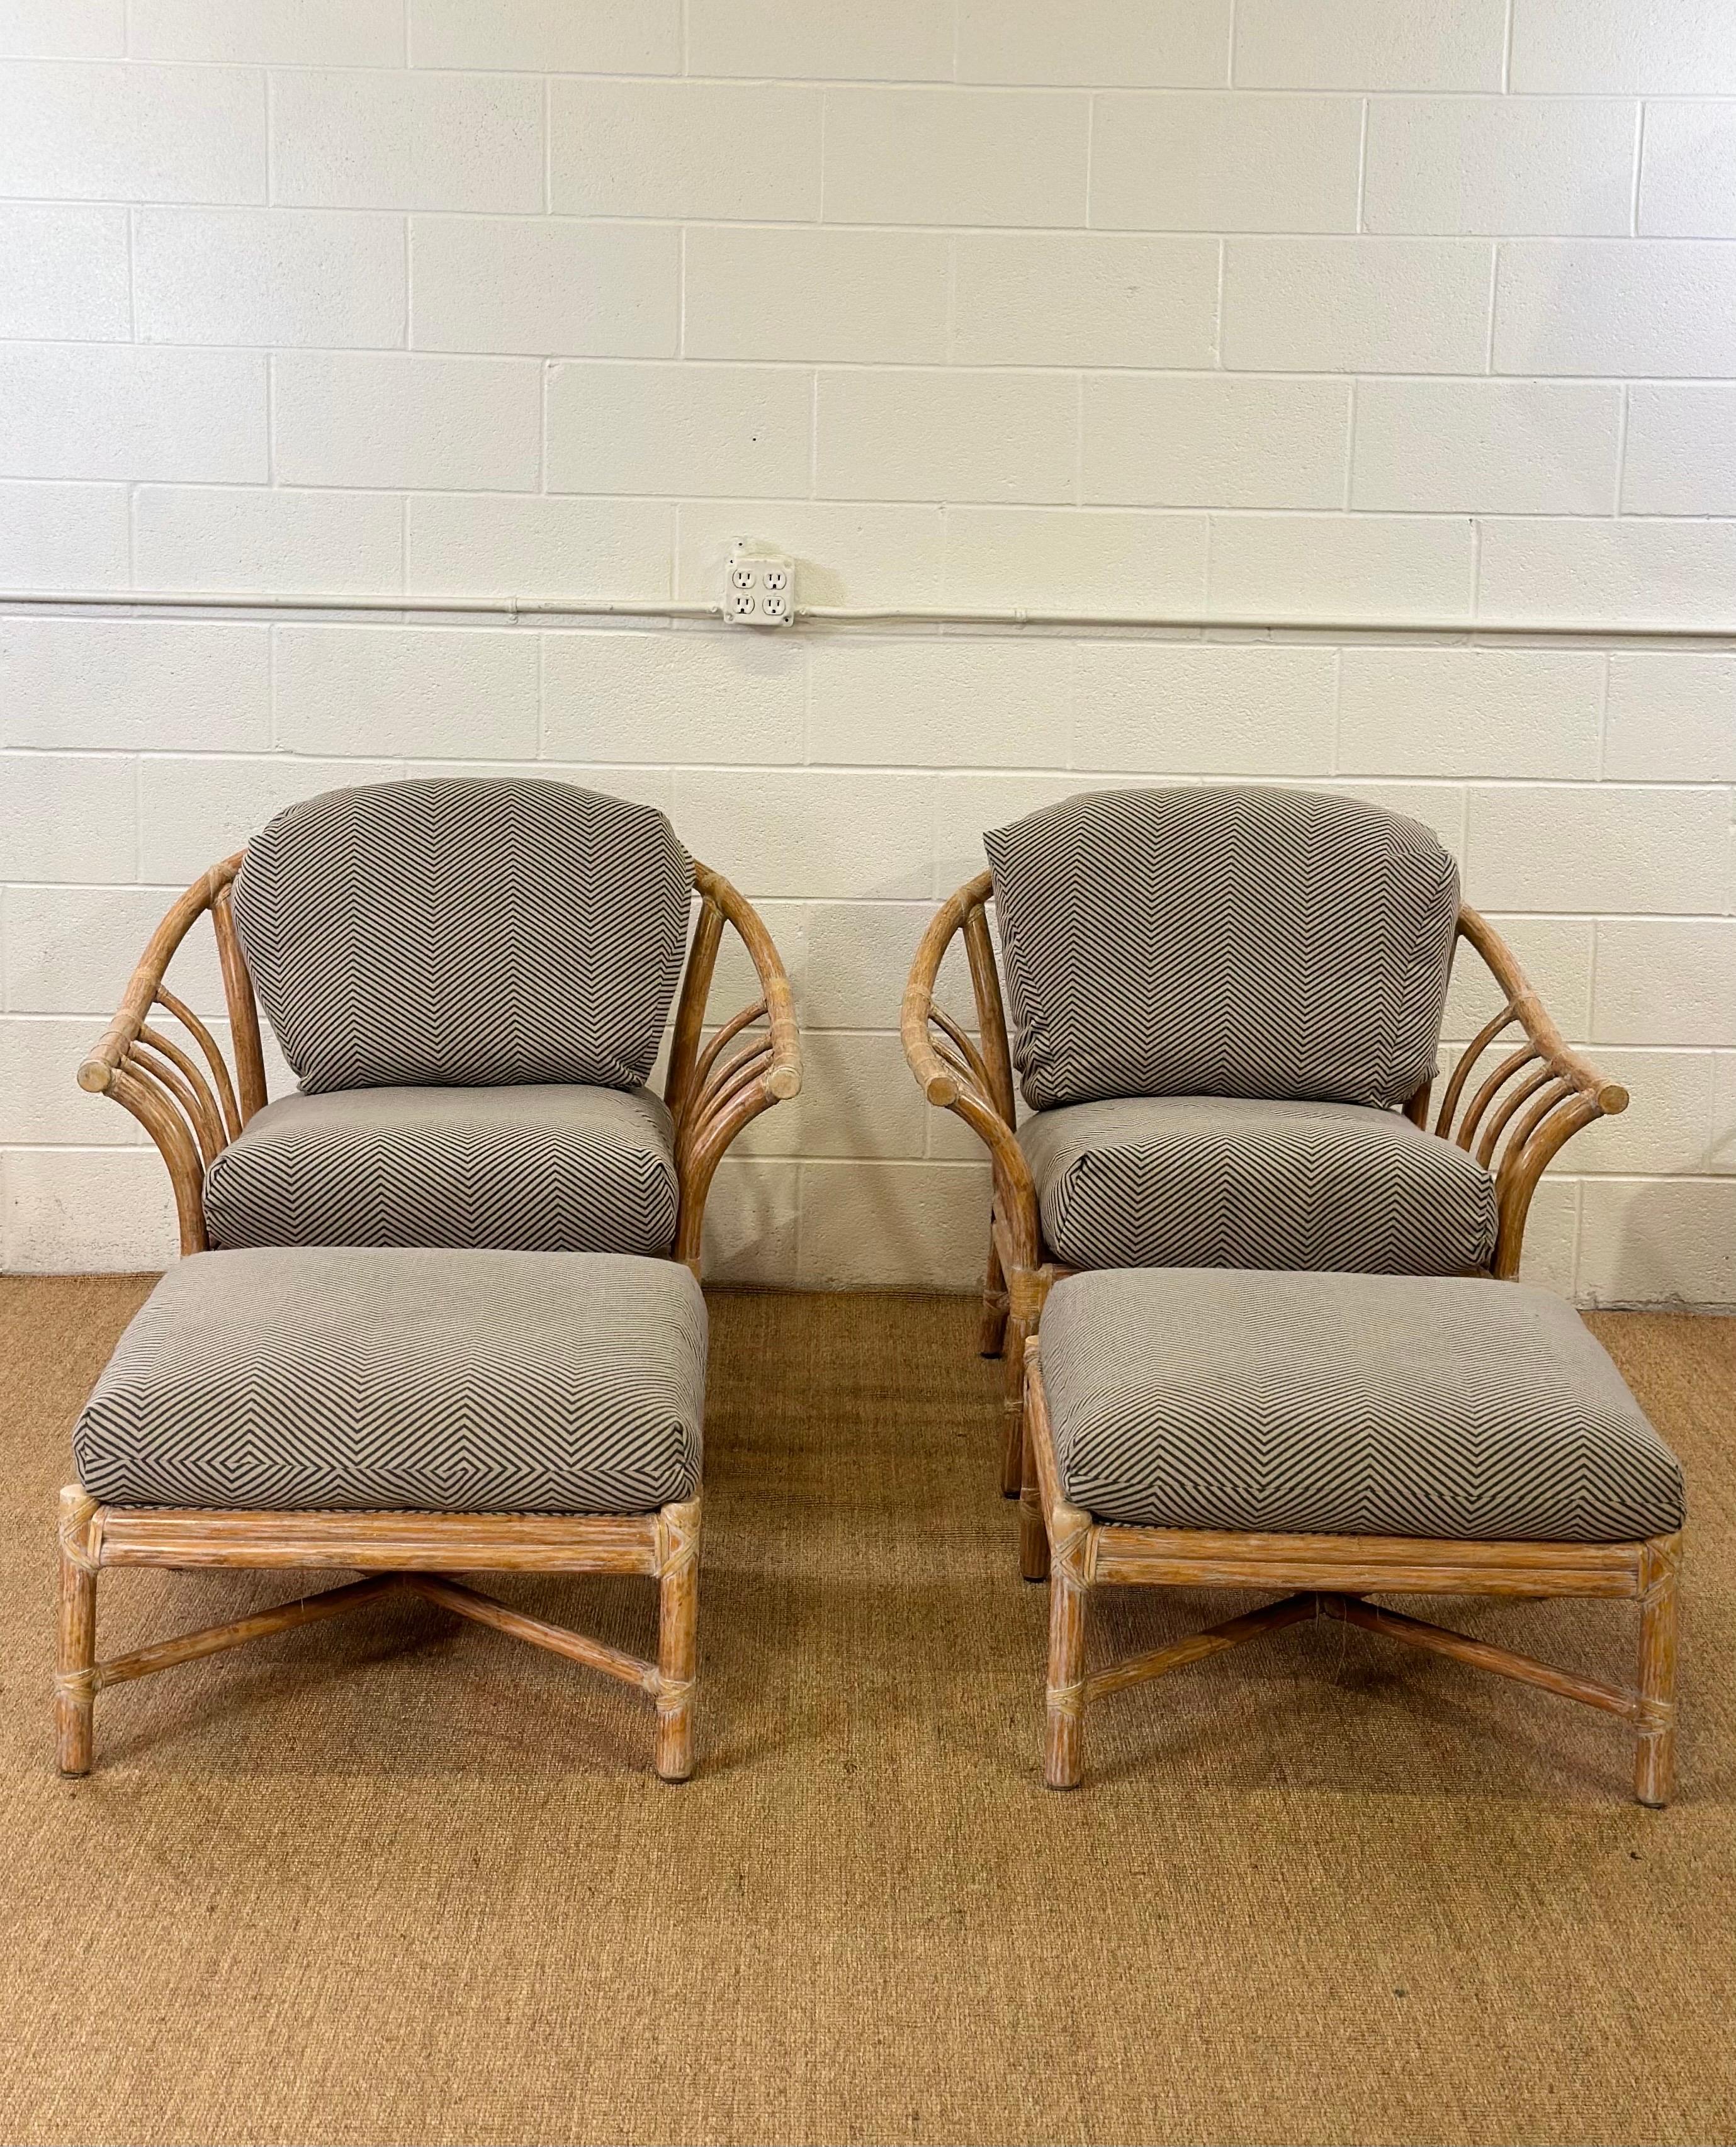 We are very pleased to offer a beautiful set of two chairs with ottomans designed by John McGuire, circa the 1990s.  McGuire designs mix incredible materials, forms, and textures to create both chic and timeless furniture; moreover, his brand has an